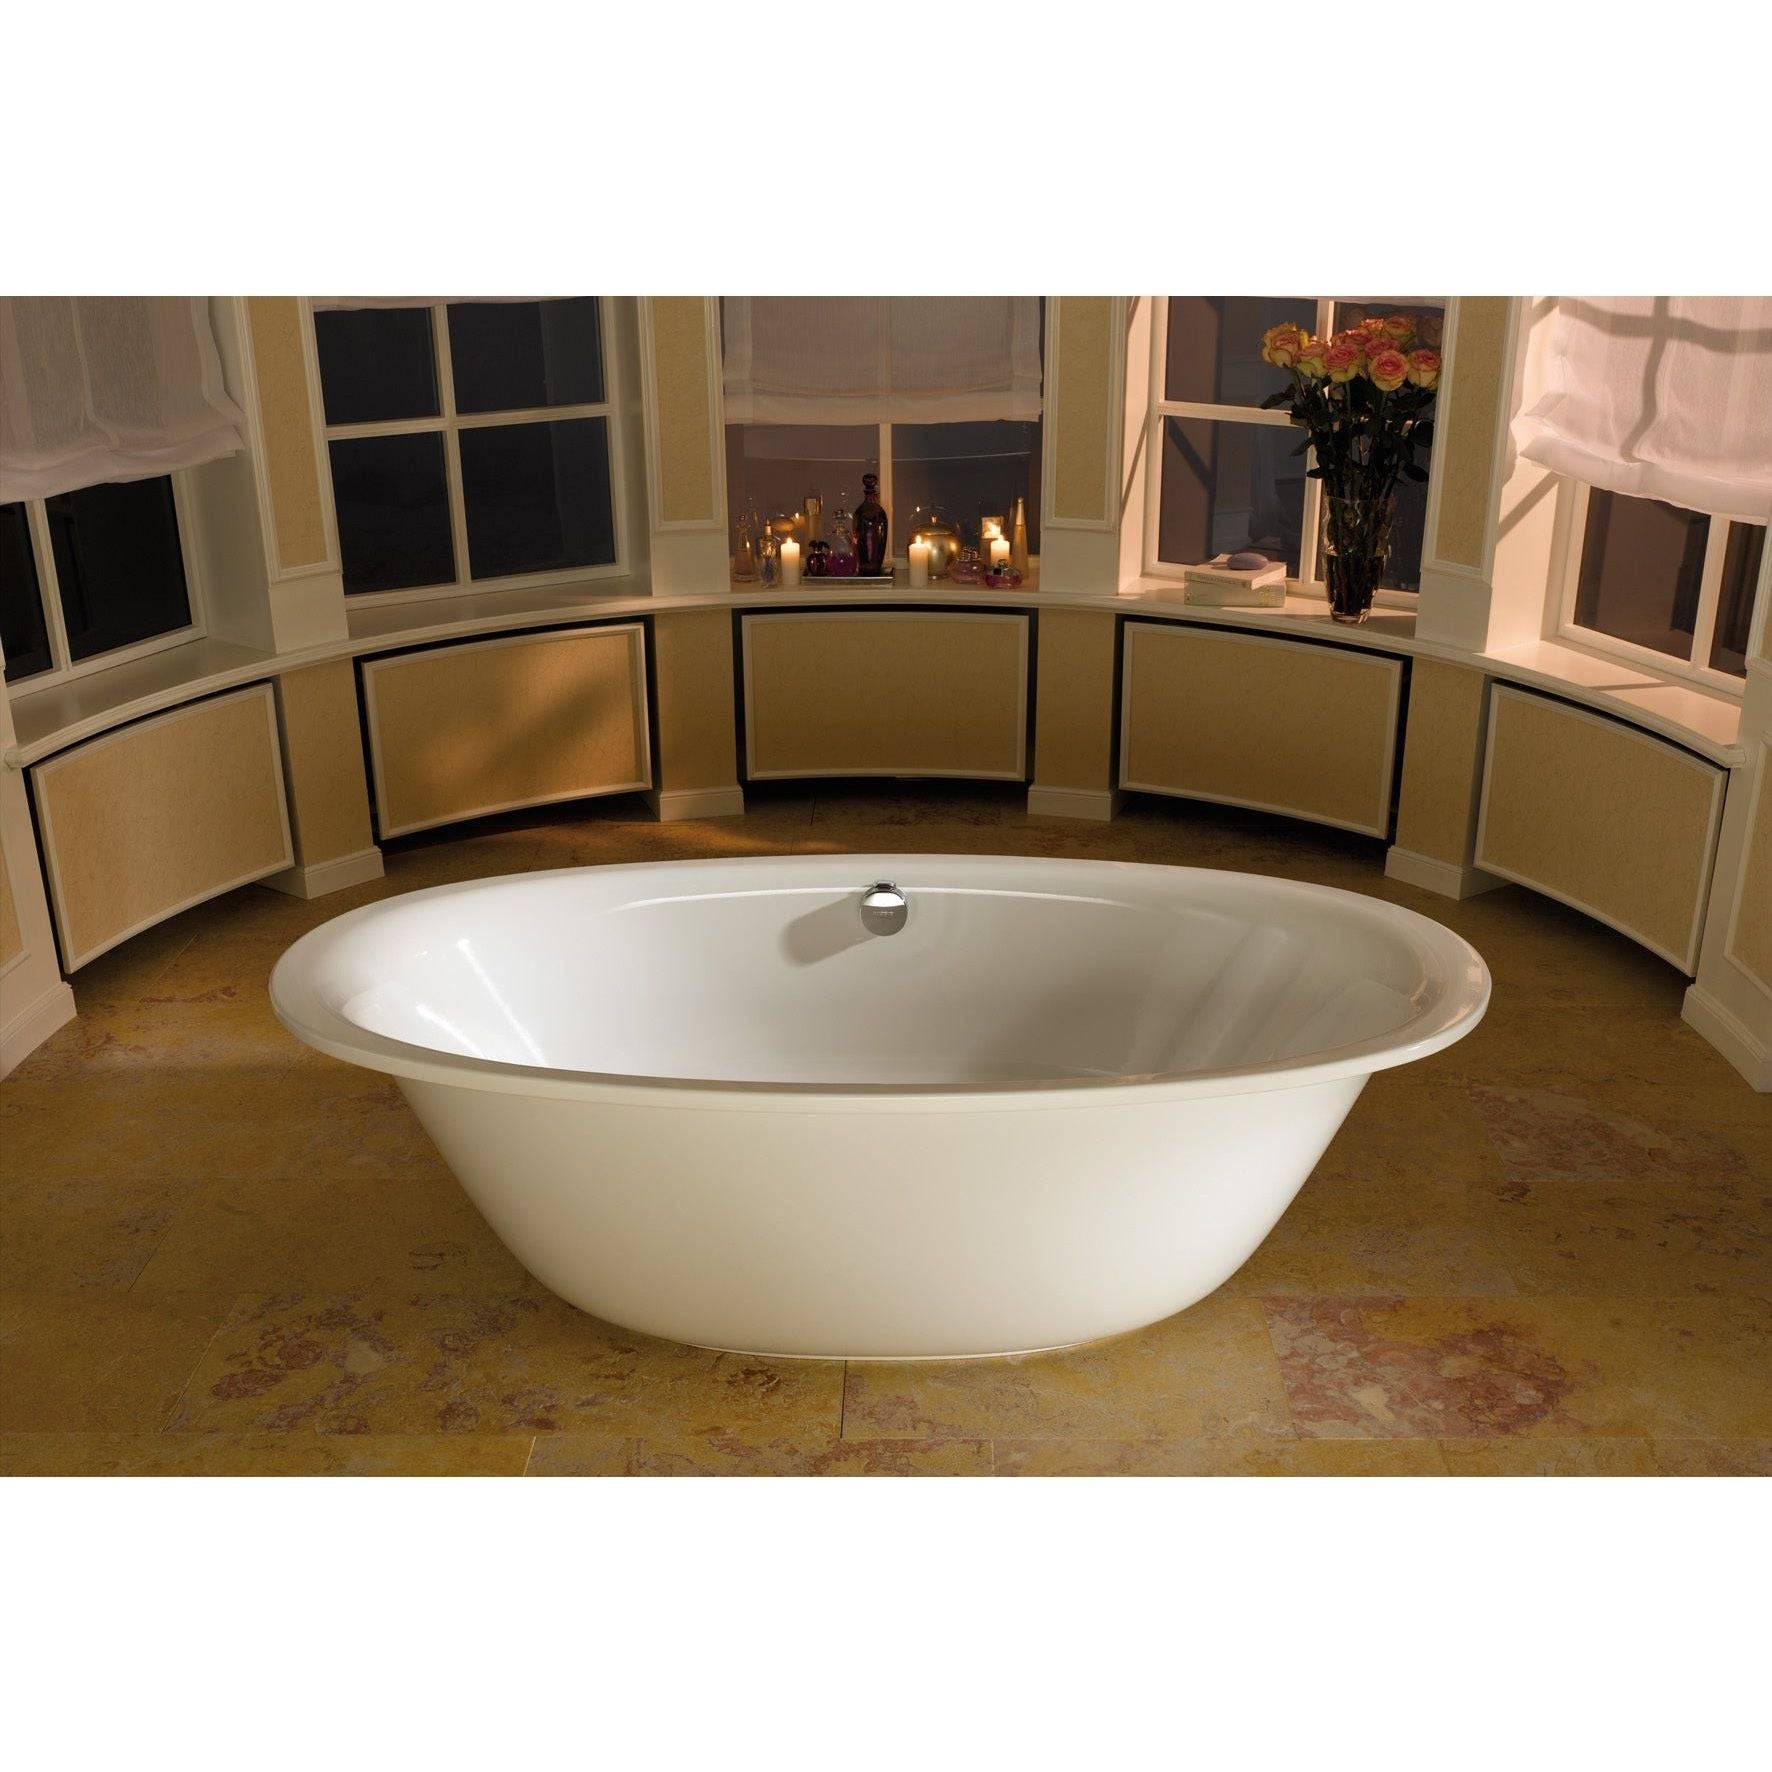 KALDEWEI Ellipso Duo Oval with Moulded Panel 1900x1000x450